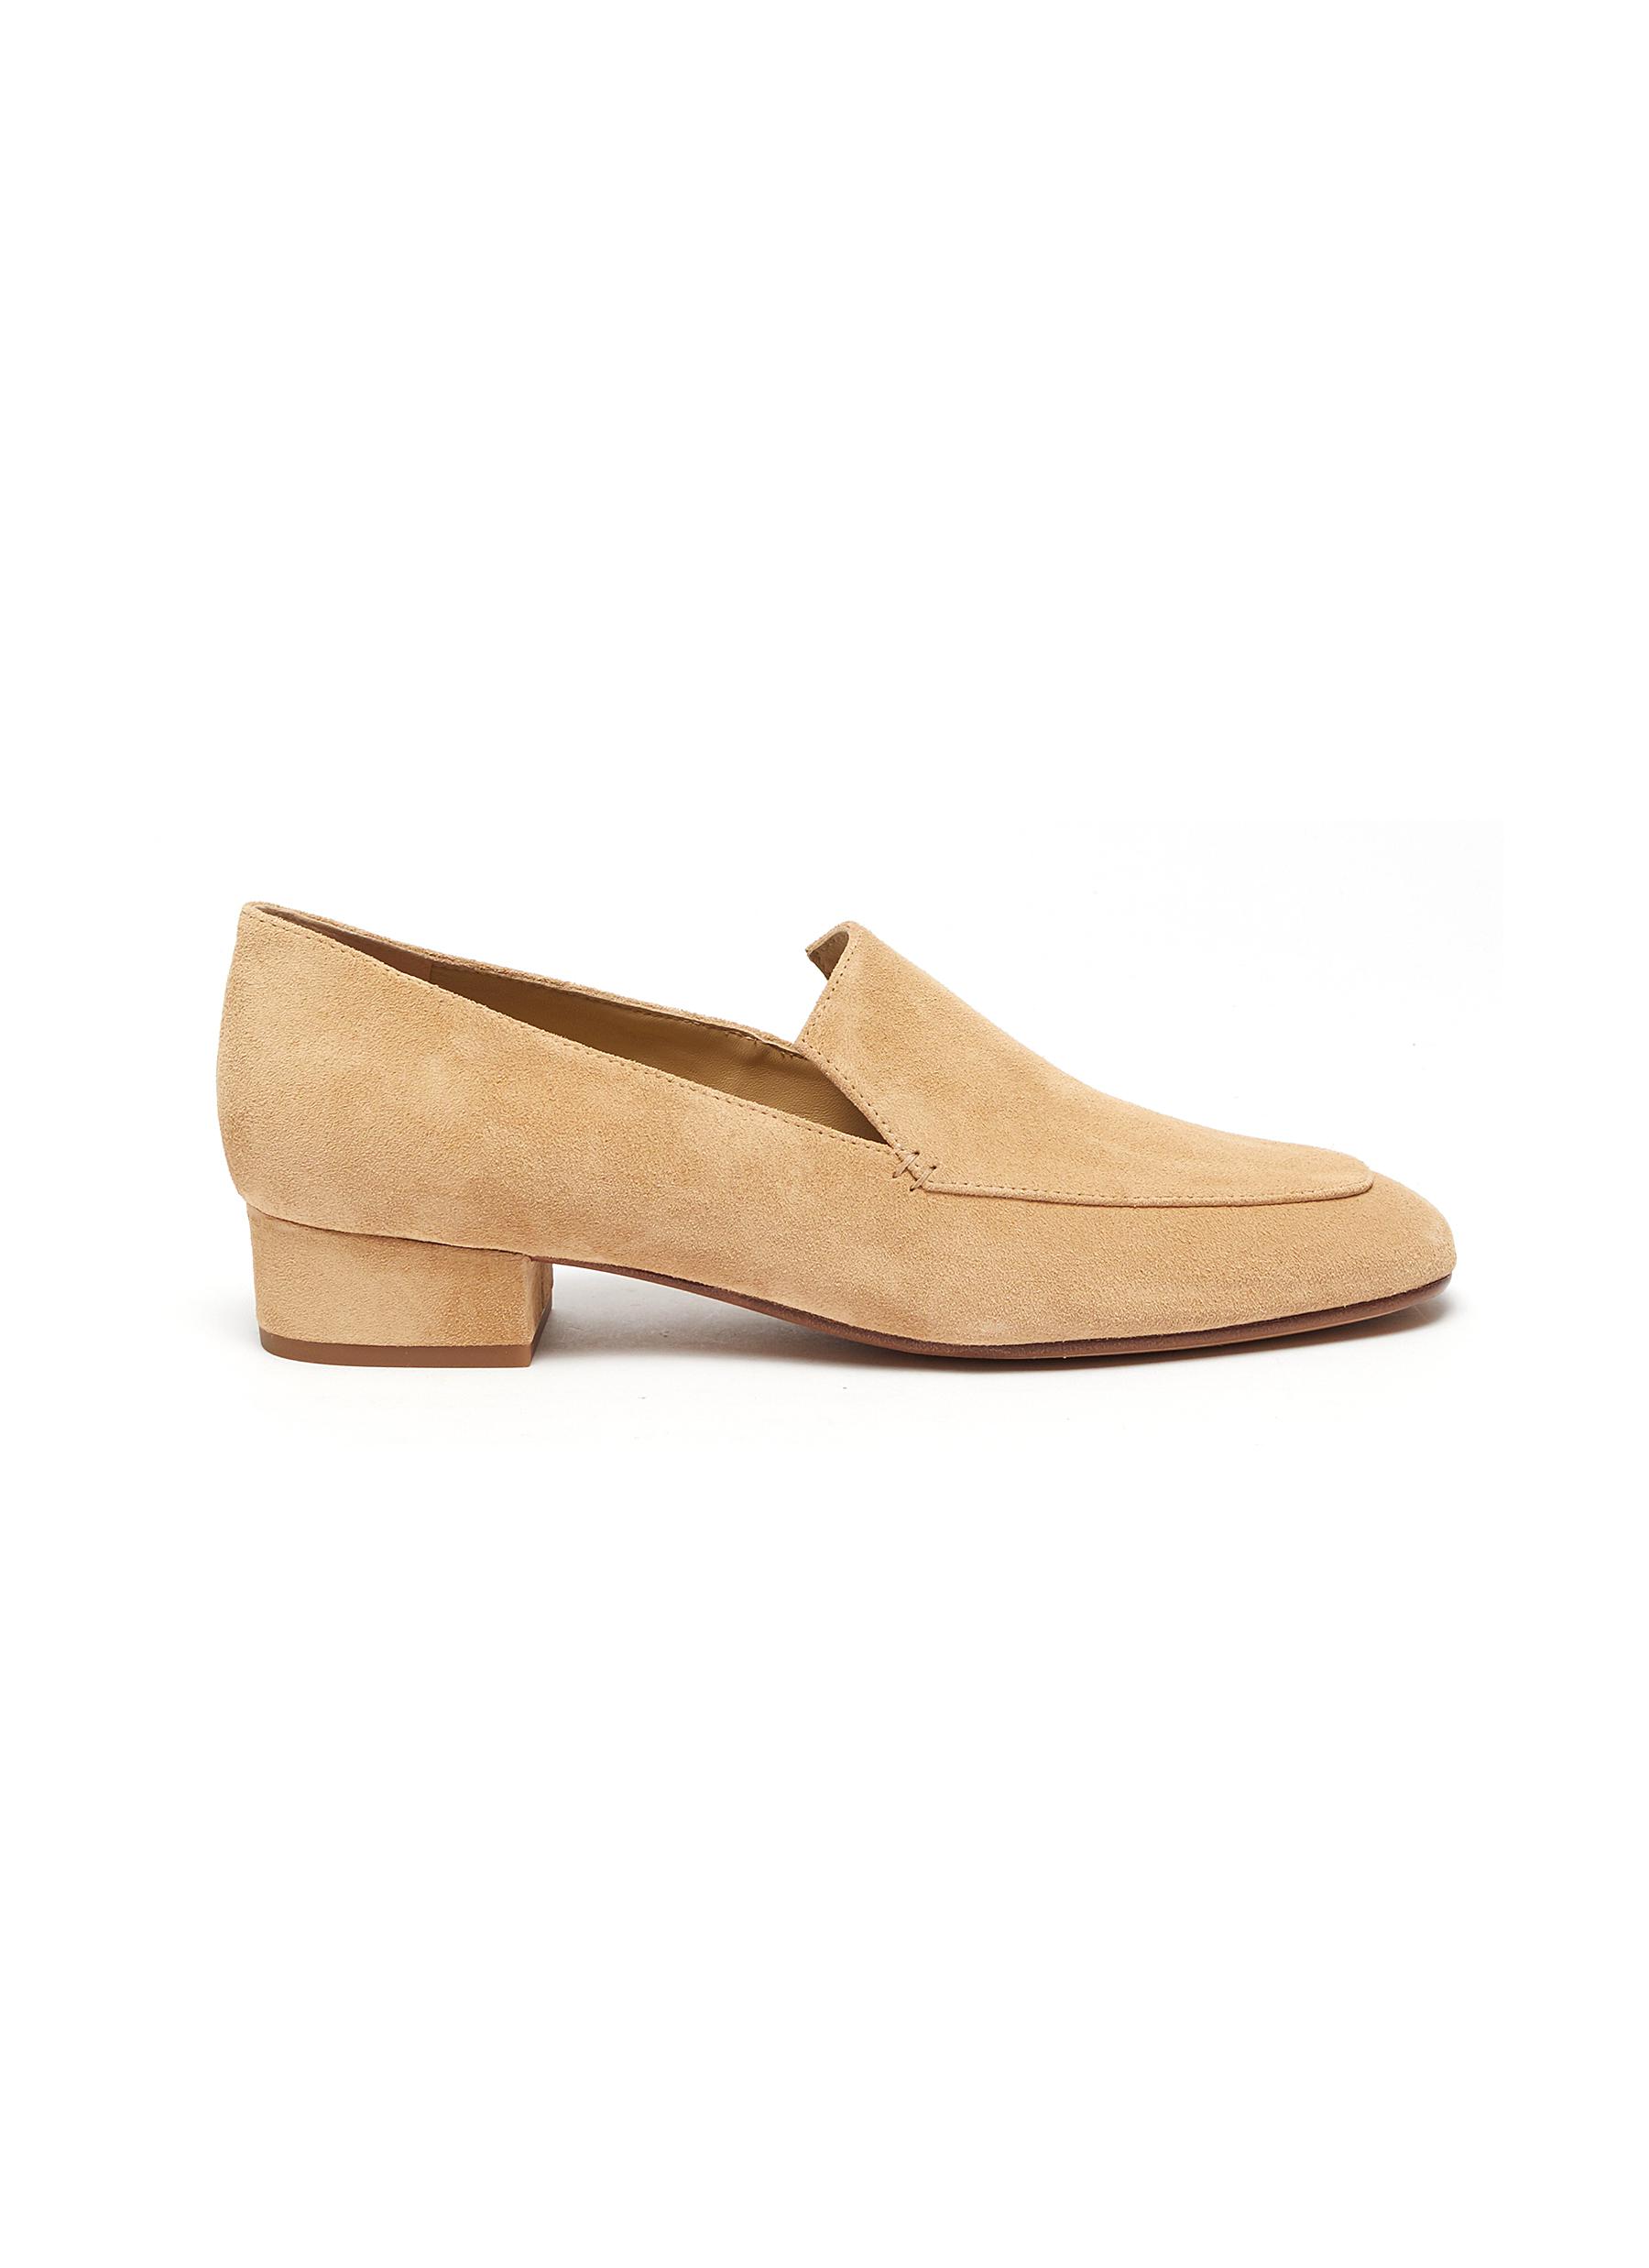 suede slip on shoes womens